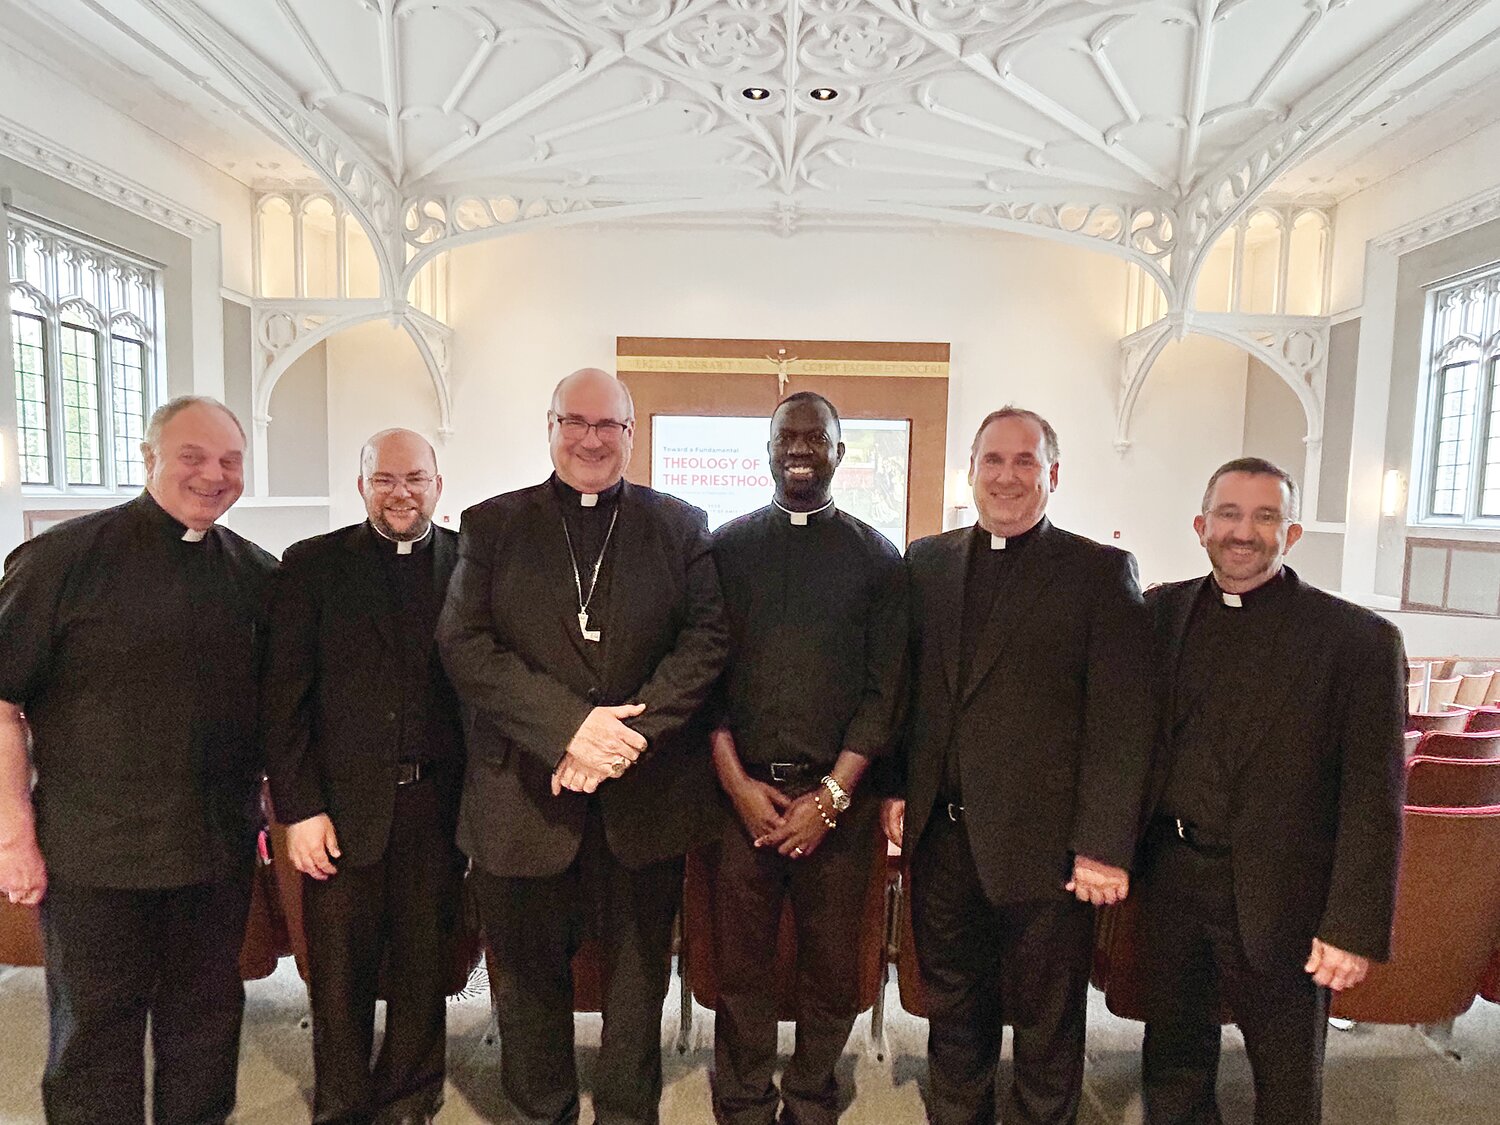 On May 16, Bishop Richard G. Henning and priests of the Diocese of Providence attended the Thomistic Institute Symposium, “Toward a Fundamental Theology of the Priesthood,” held at Catholic University of America, Washington, D.C. Pictured from left, Father Thomas Ferland, Father Brendan Rowley, Bishop Henning, Father Joseph Brice, Msgr. Albert Kenney and Father Carl Fisette.